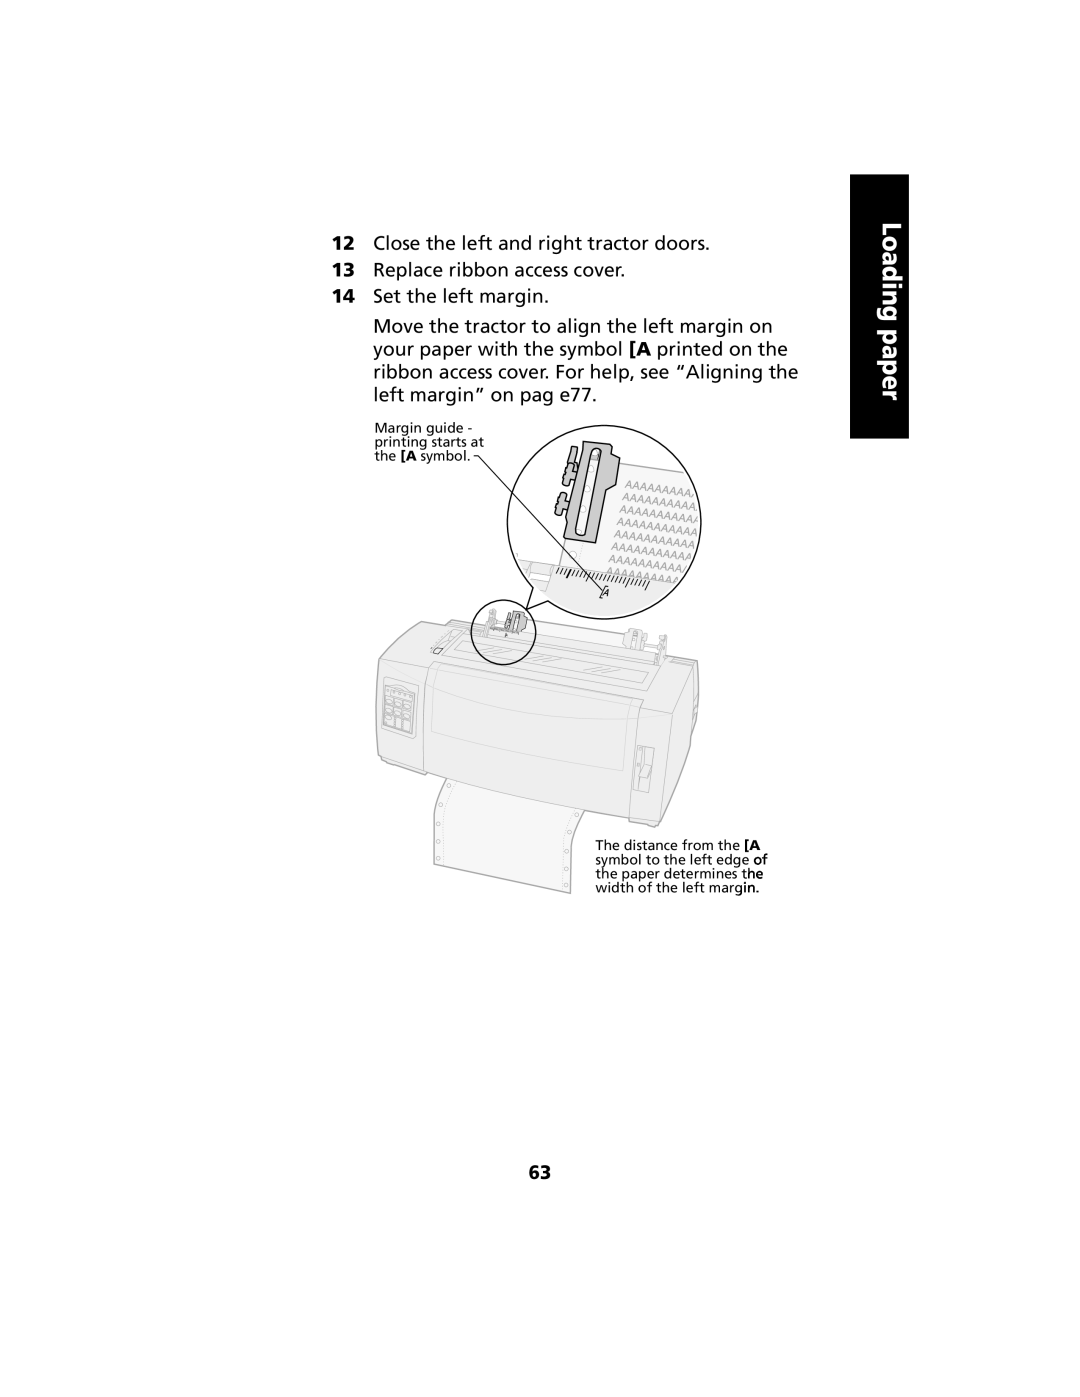 Lexmark 2480 manual Loading paper, Close the left and right tractor doors 